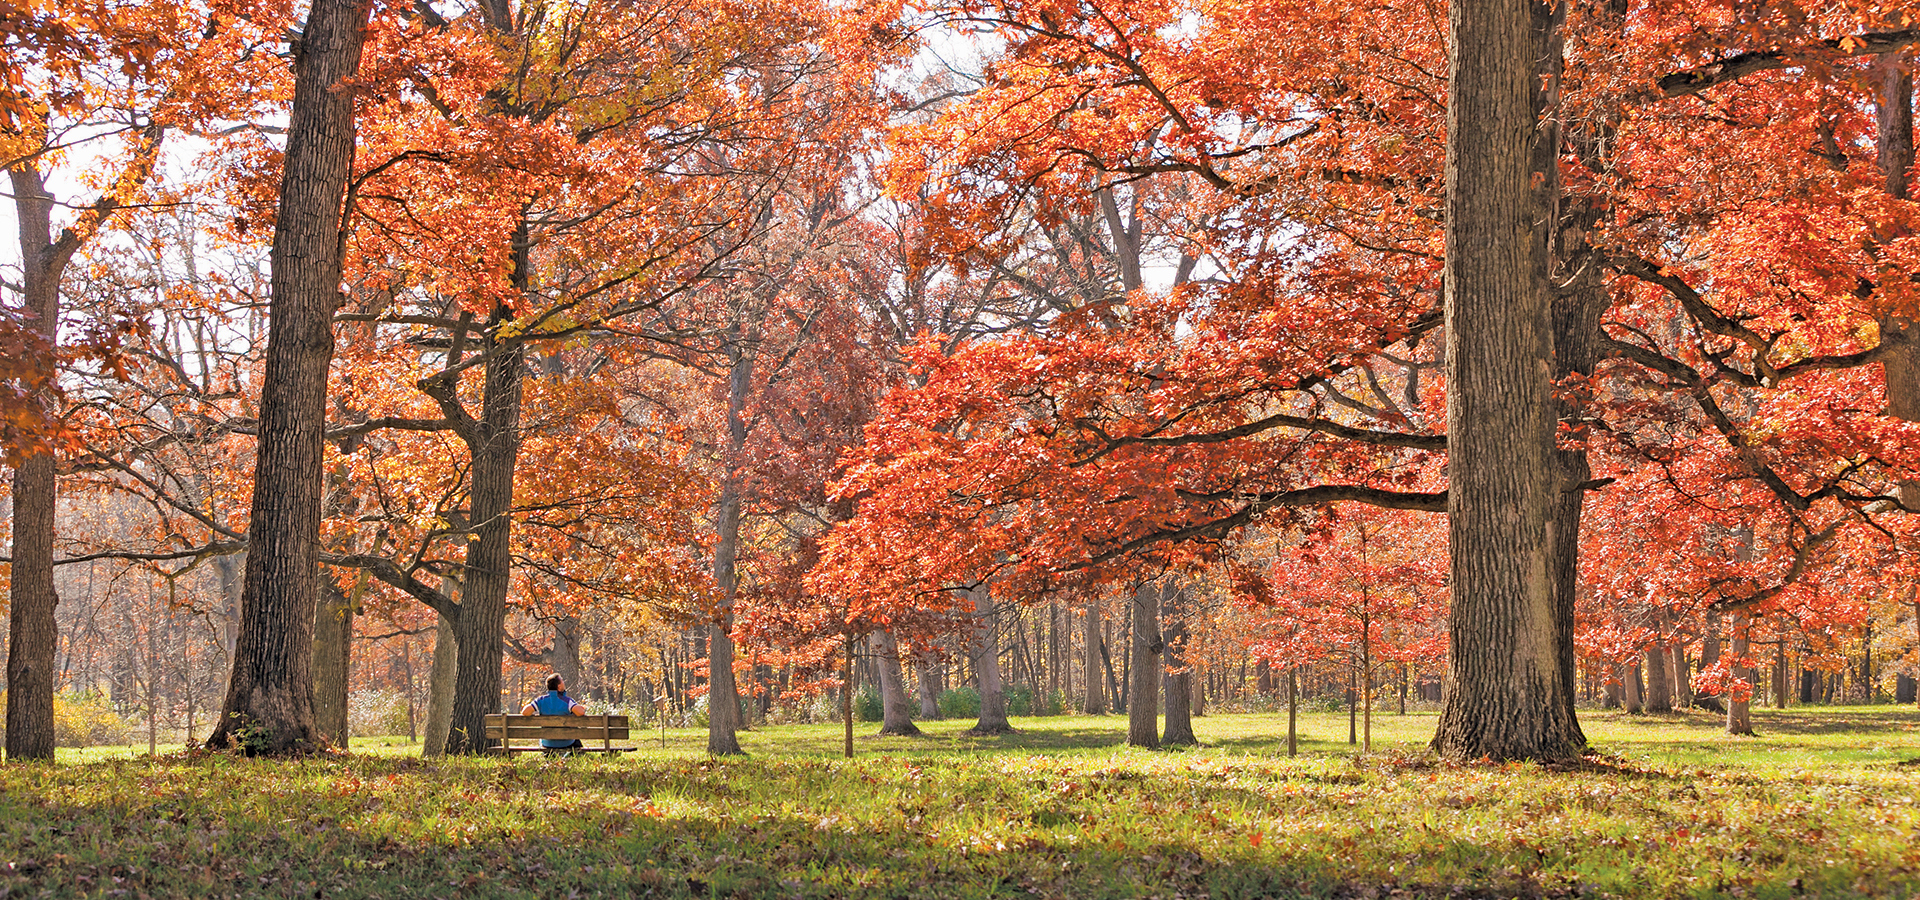 Man rests on bench in the vibrant red oak collection in fall